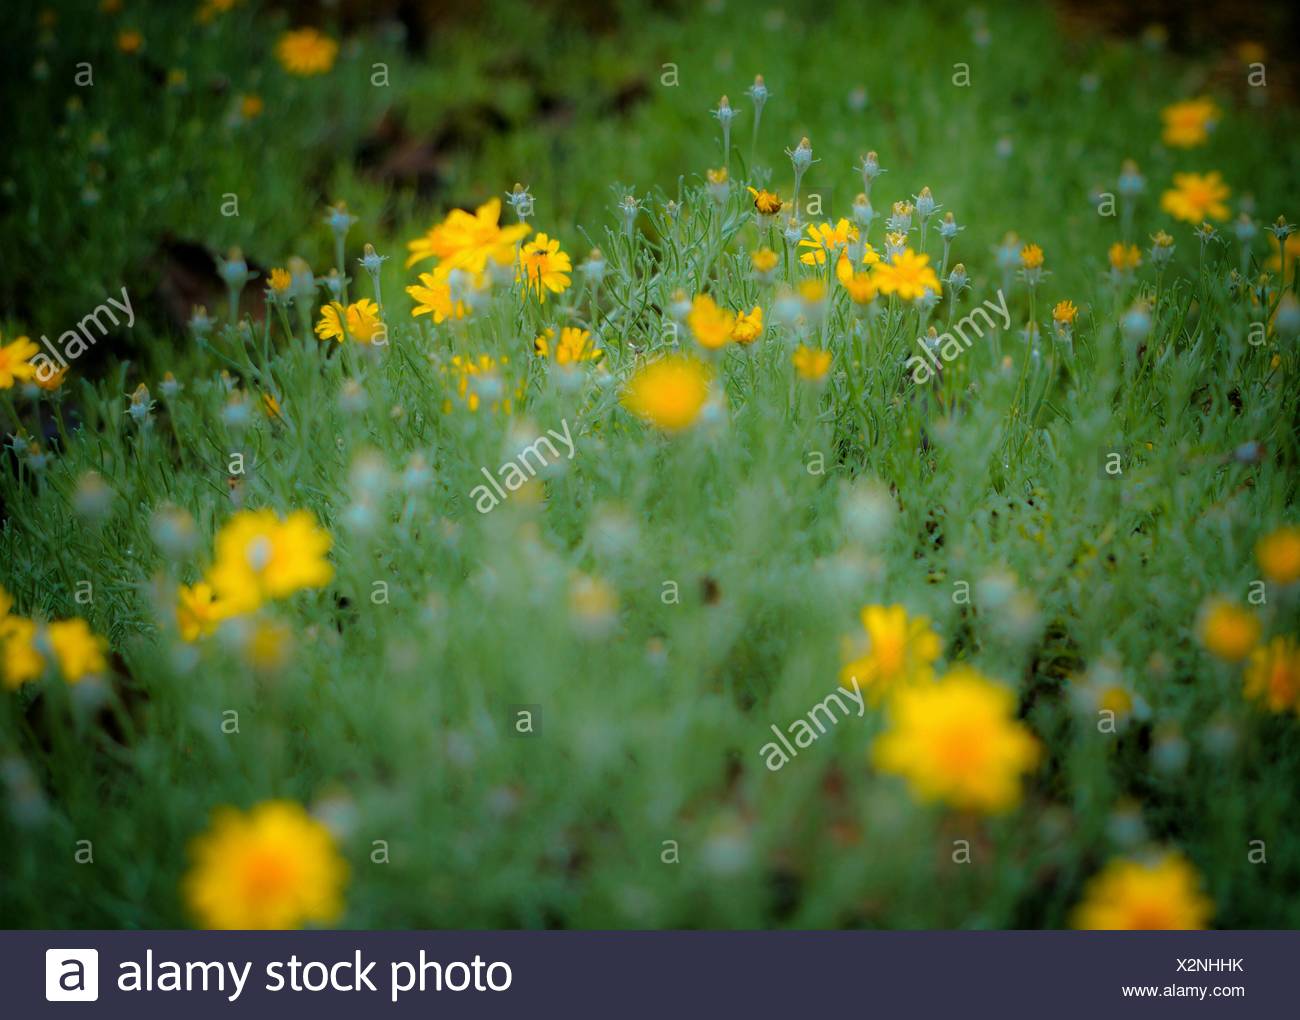 Download High Angle View Of Yellow Flowers Growing On Field Stock Photo Alamy Yellowimages Mockups